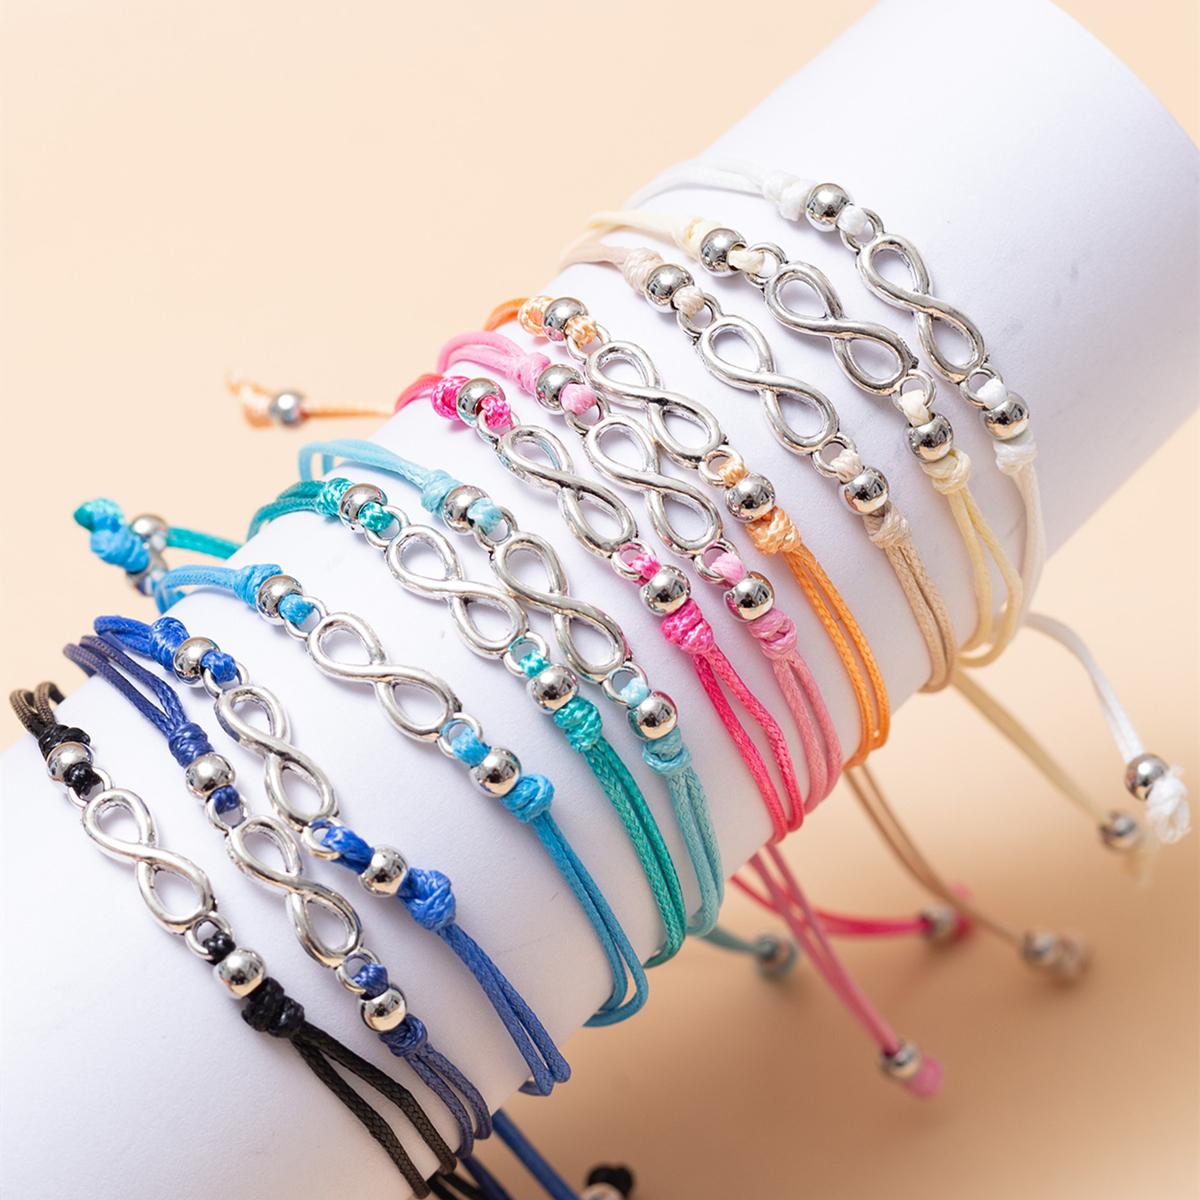 

12 Pcs Bohemian Style Antique Silver Color Infinity Sign Cord Bracelet Adjustable Bangle For Women Men Birthday Gift Fashion Jewelry